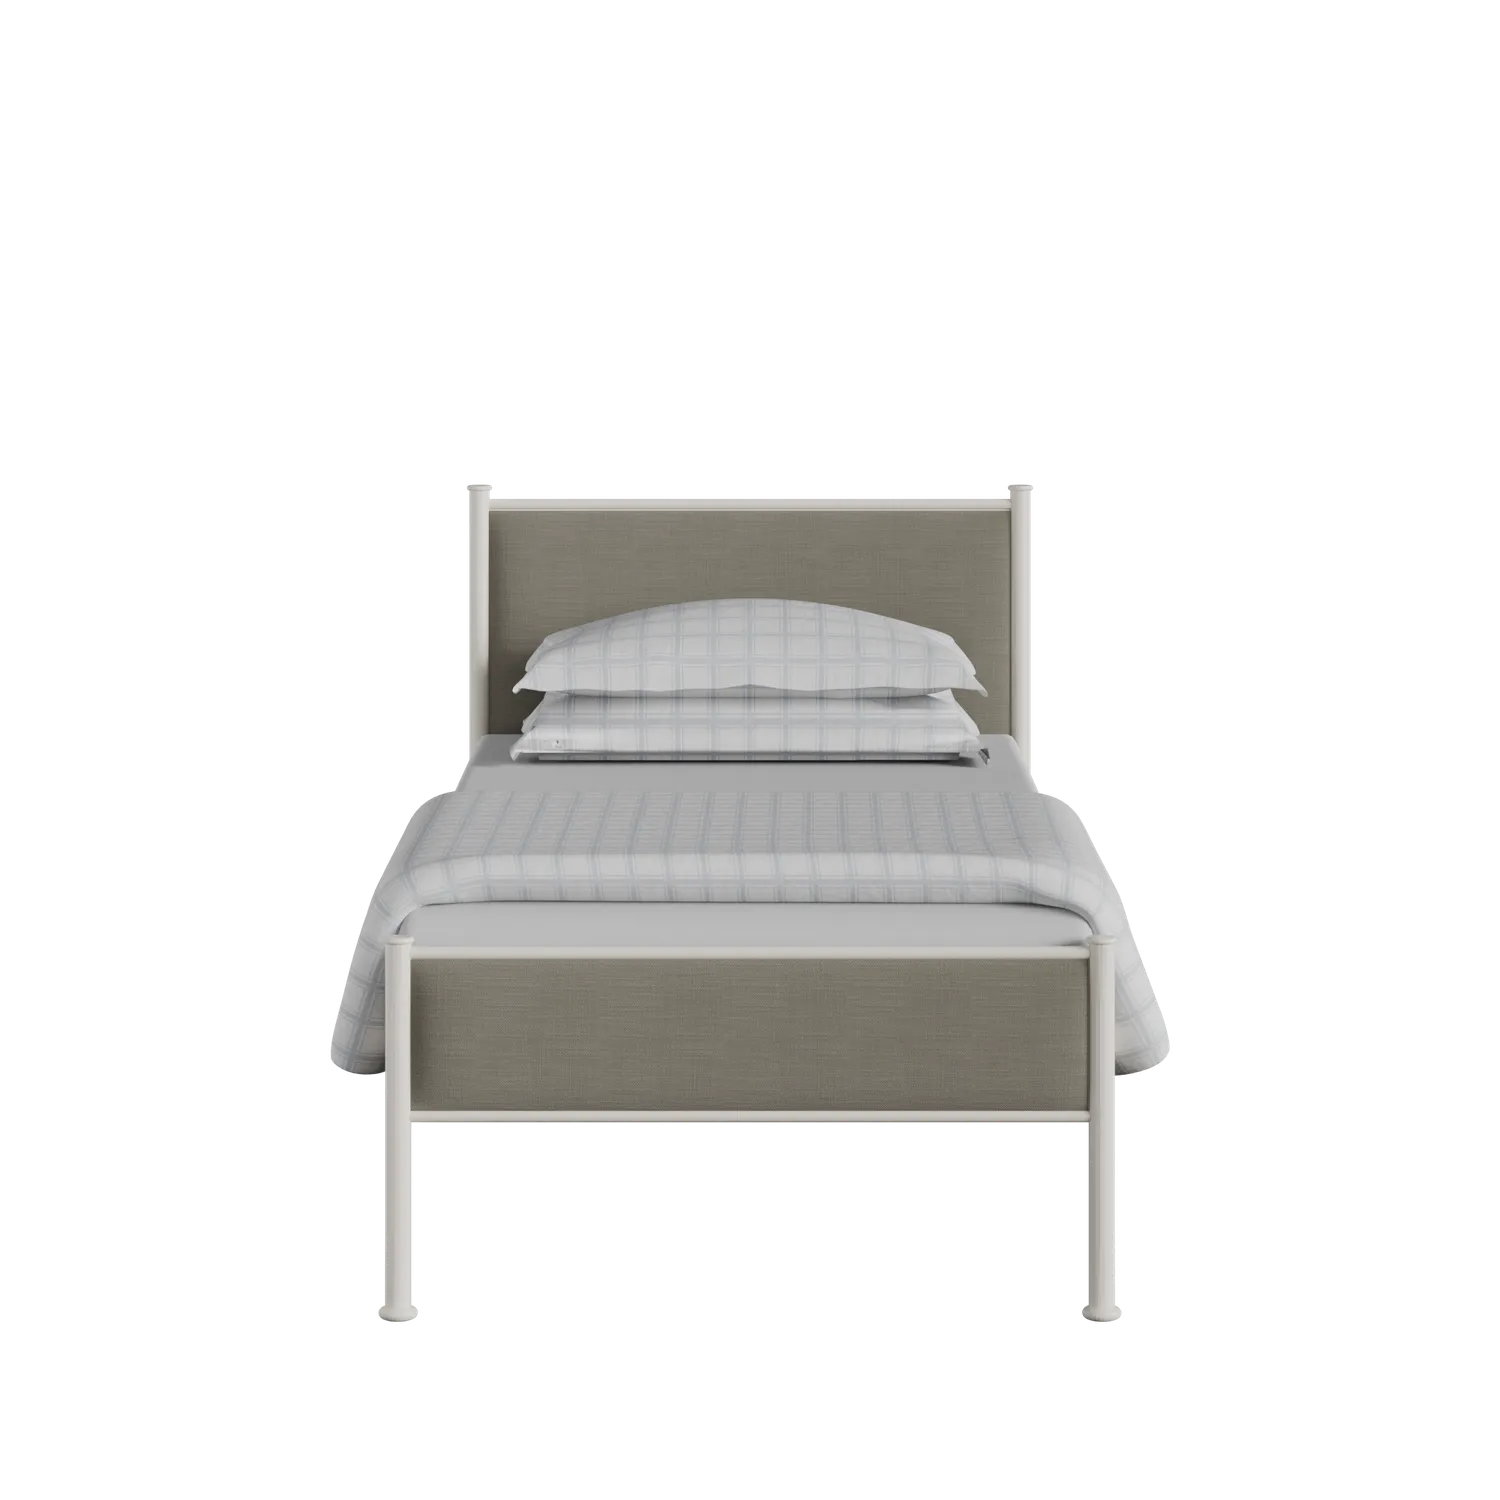 Brest iron/metal single bed in ivory